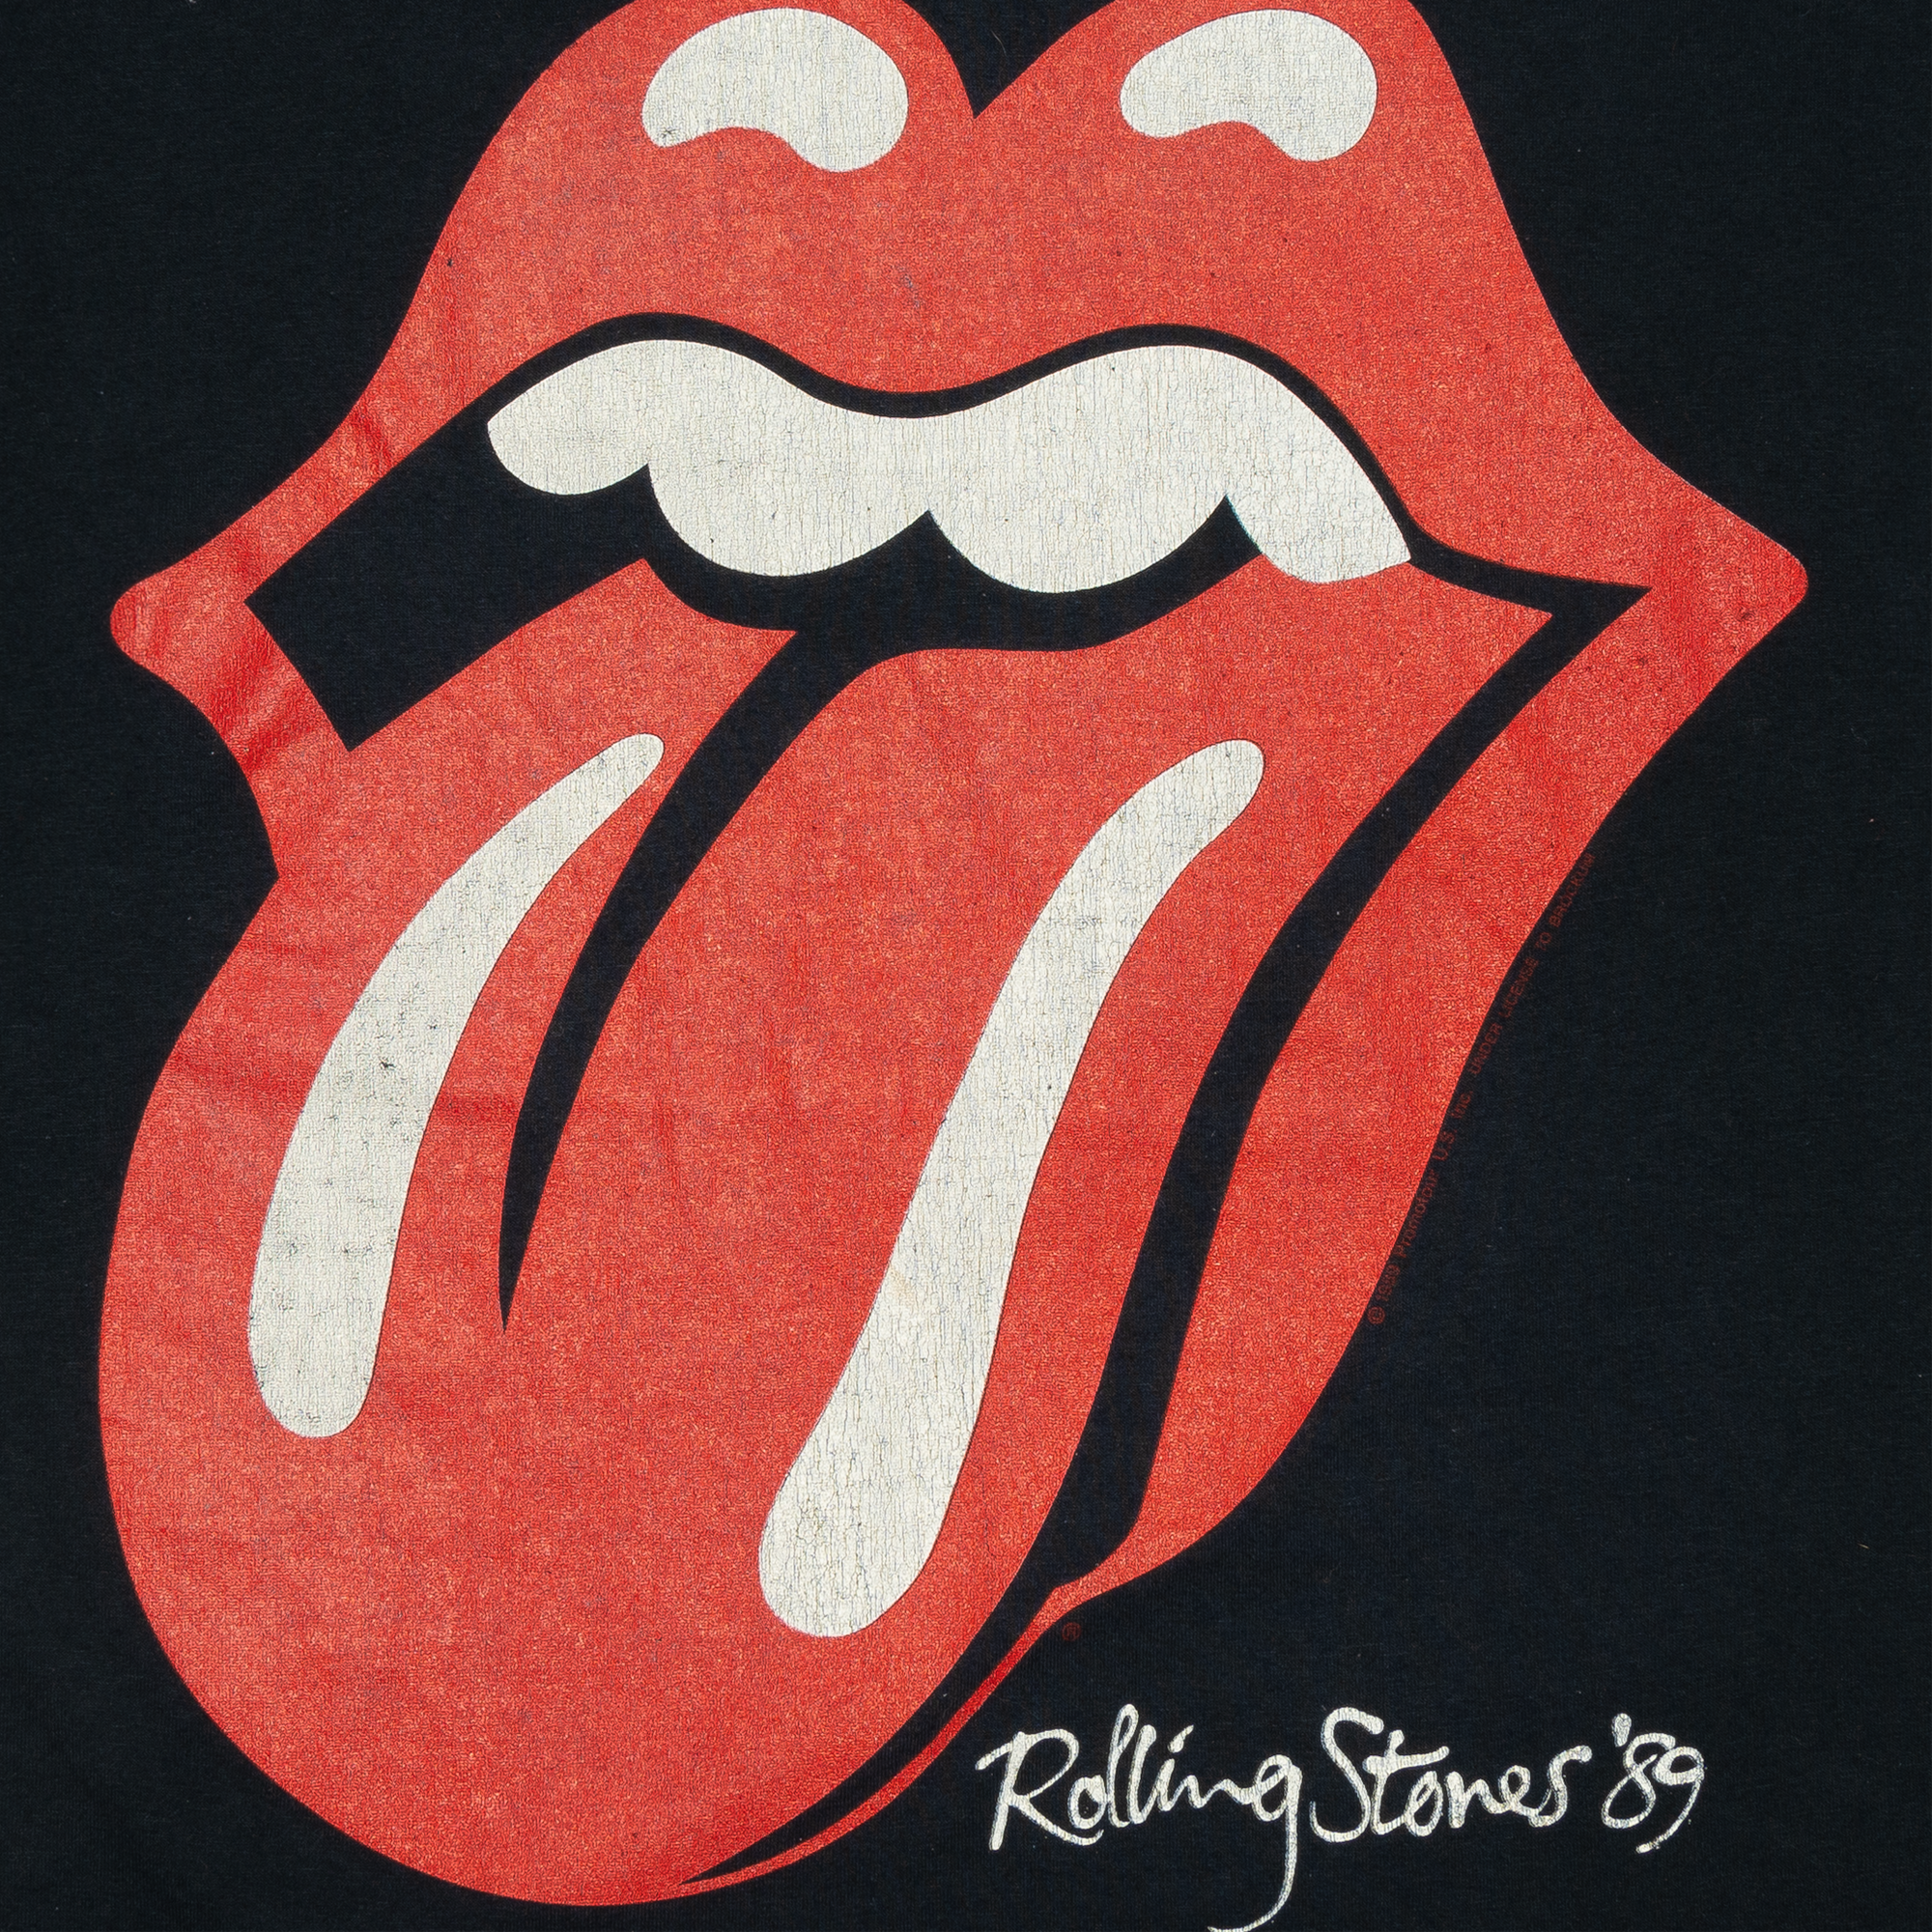 The Rolling Stones North American Tour 1989 Tee Black-PLUS